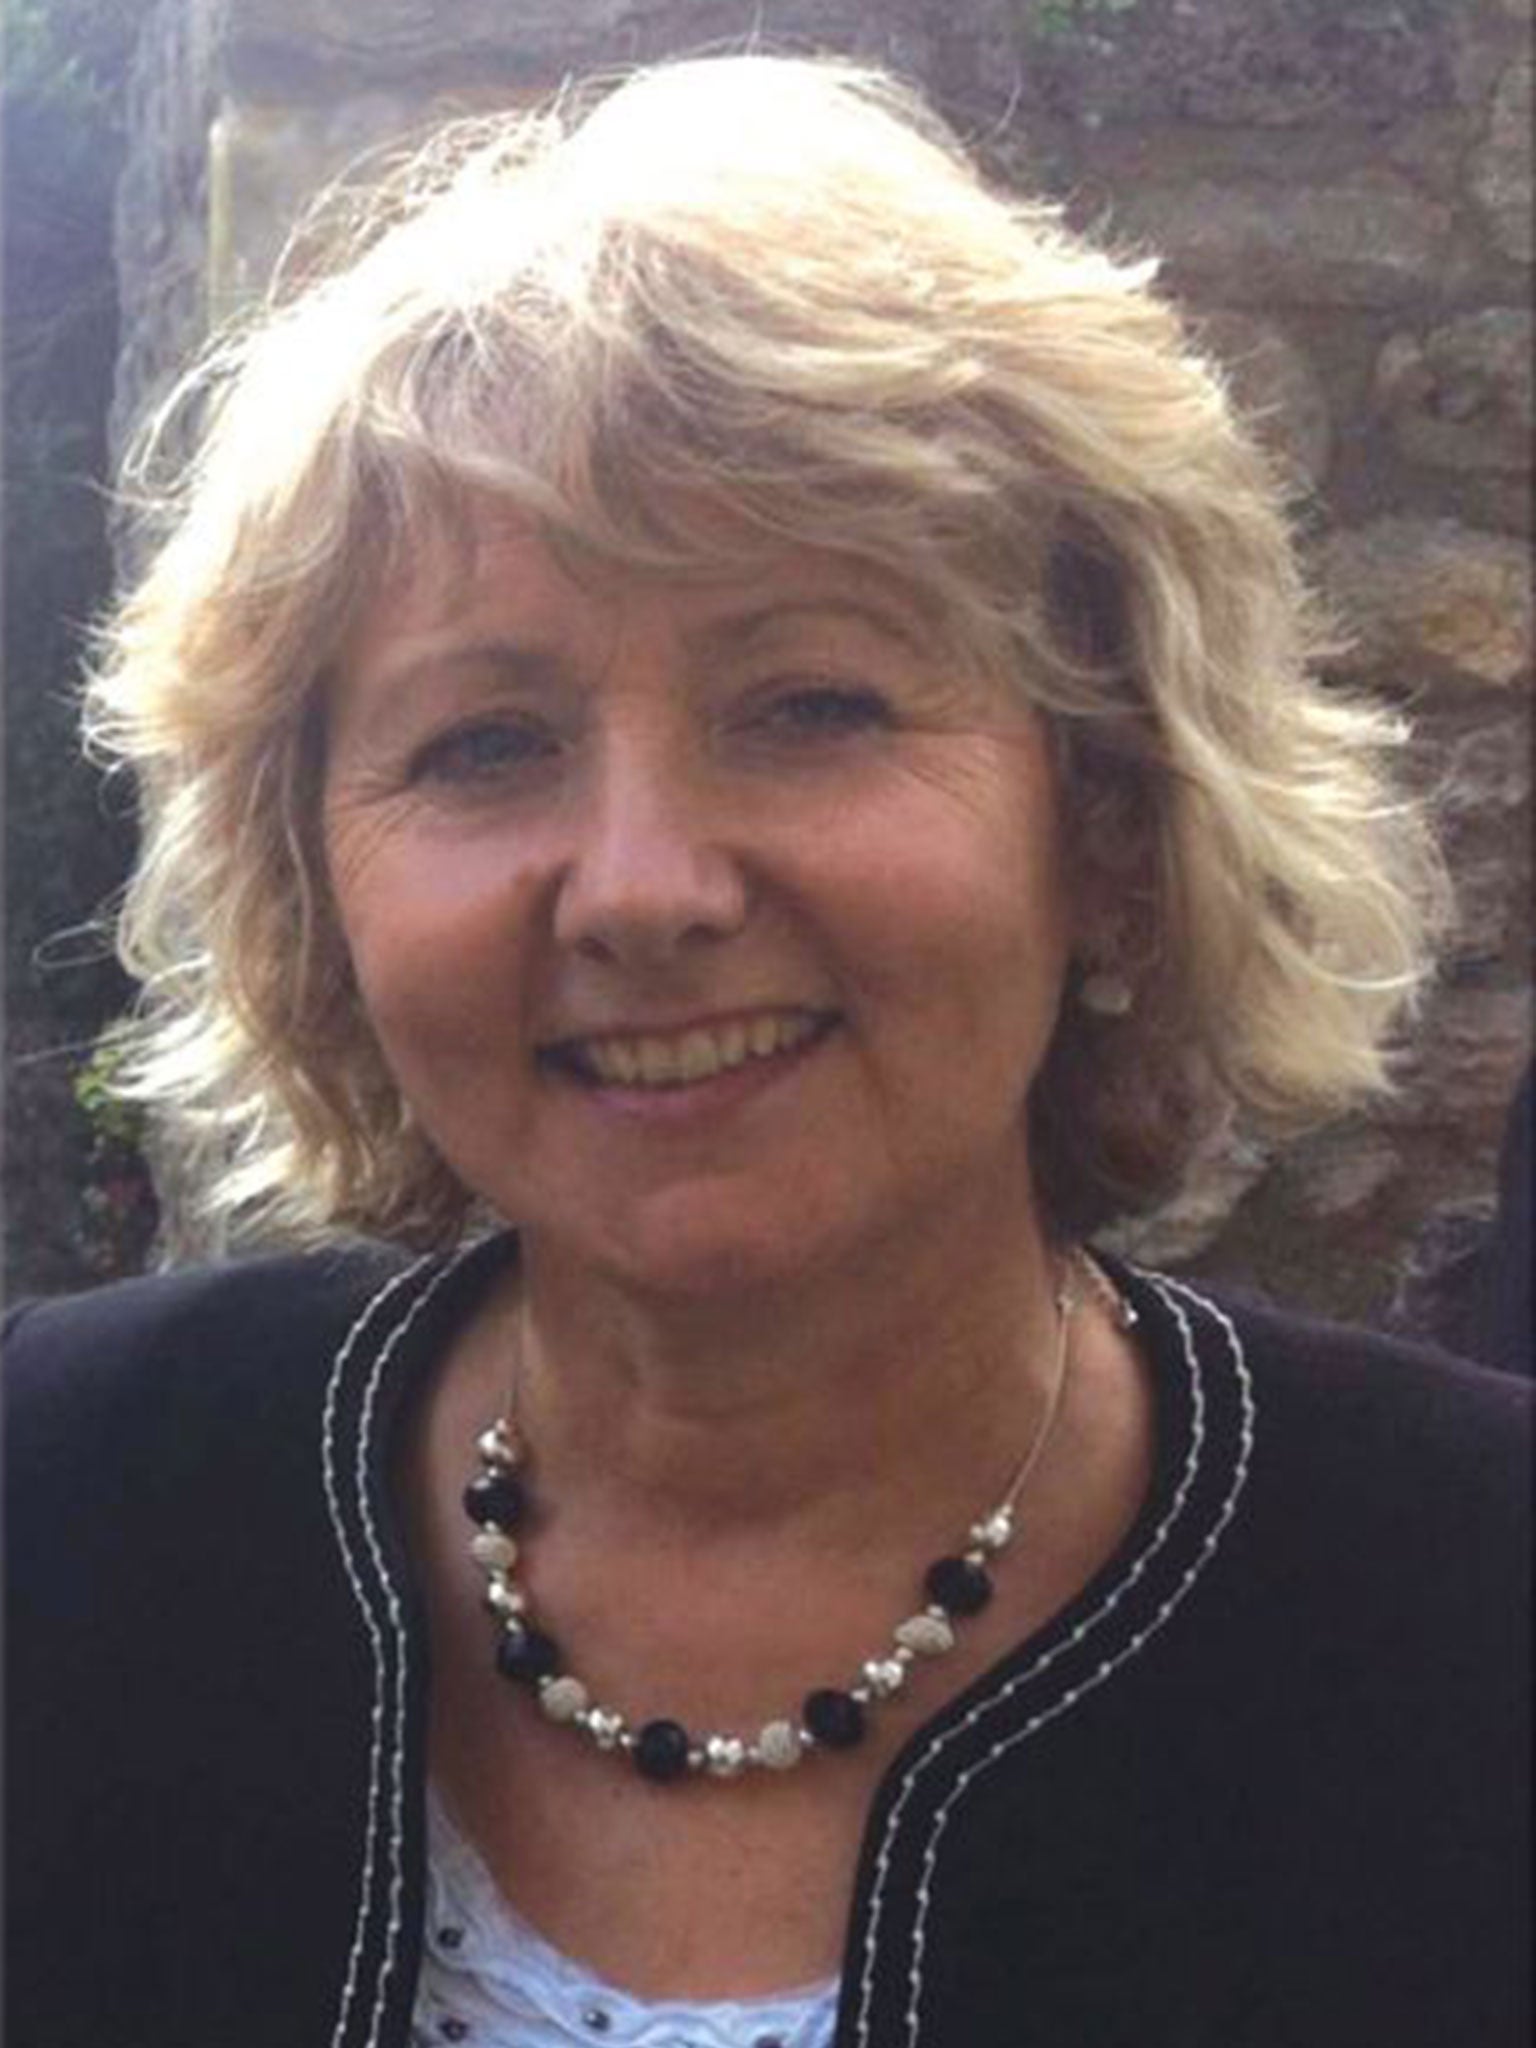 Ann Maguire was stabbed to death in a Leeds classroom. The Ann Maguire Gala will be set up in her memory